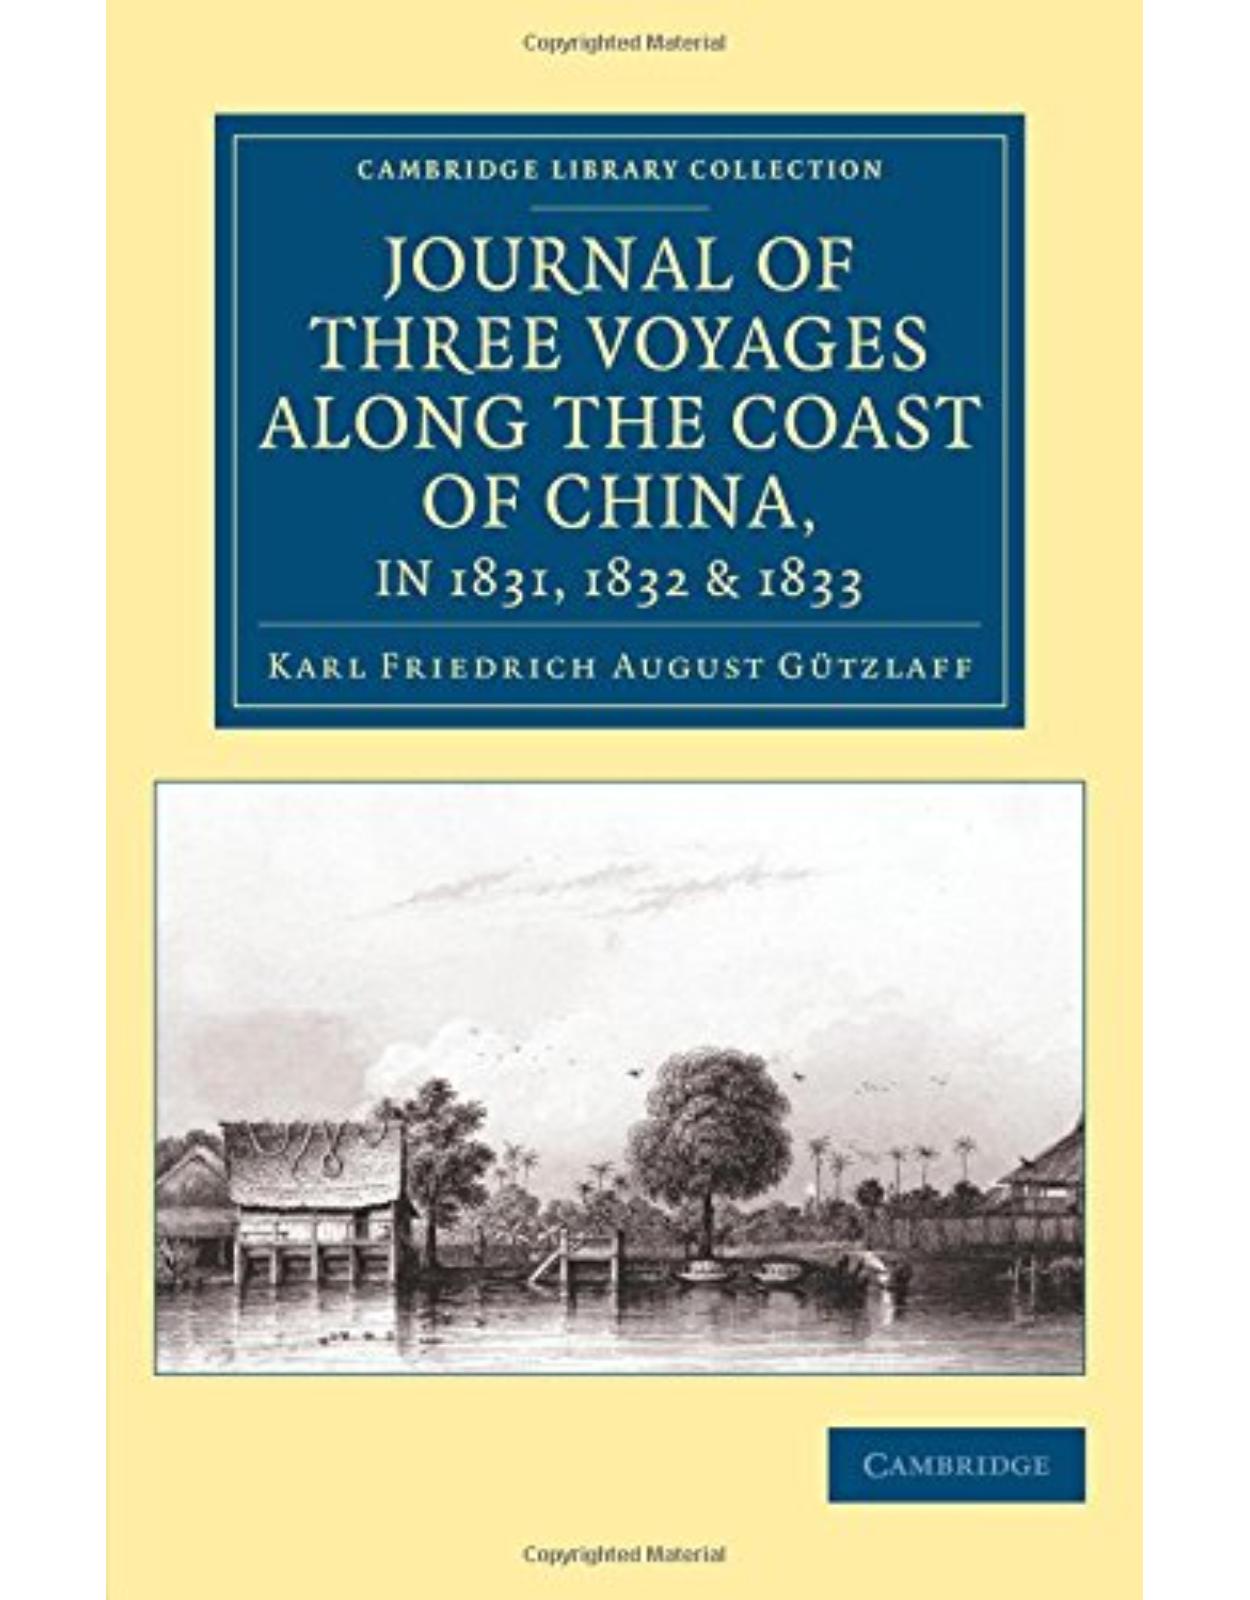 Journal of Three Voyages along the Coast of China, in 1831, 1832 and 1833: With Notices of Siam, Corea, and the Loo-Choo Islands (Cambridge Library Collection - East and South-East Asian History)